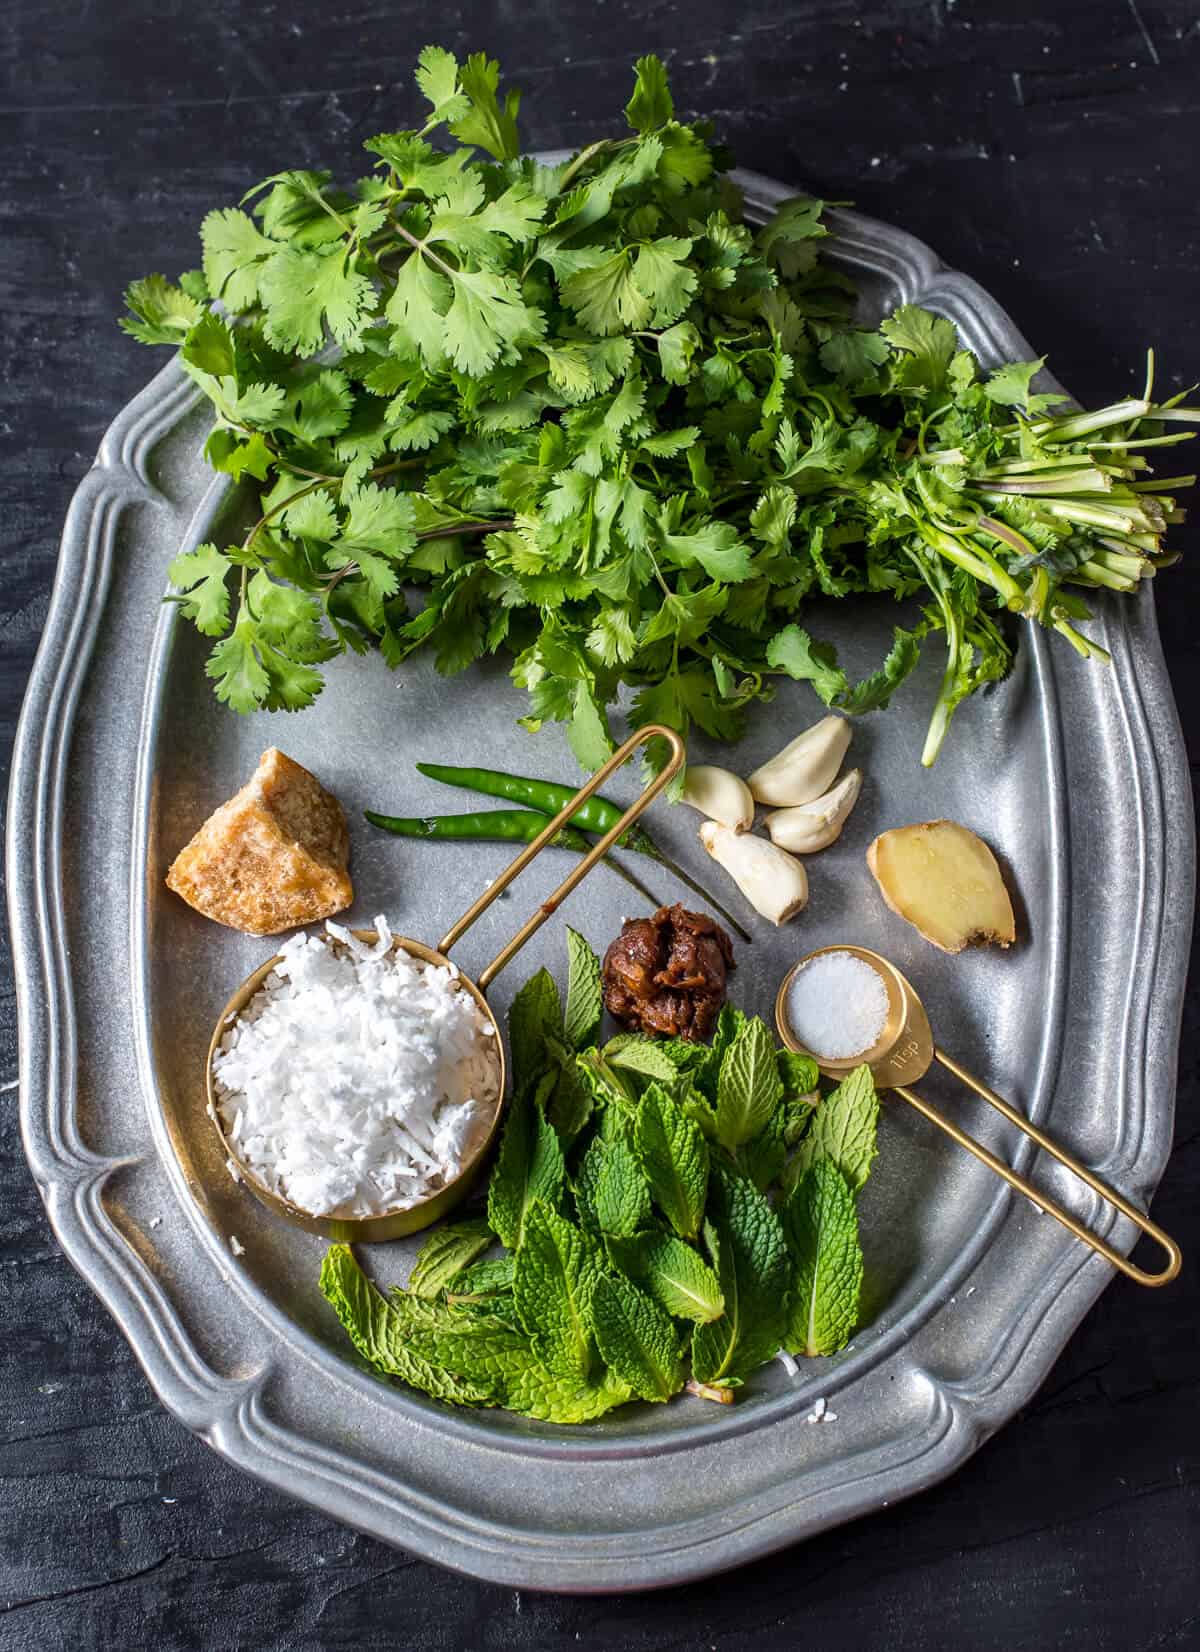 Ingredients used in Cliantro Mint Chutney - Cilantro, Mint leaves, Jaggery, Garlic, Tamarind and Salt